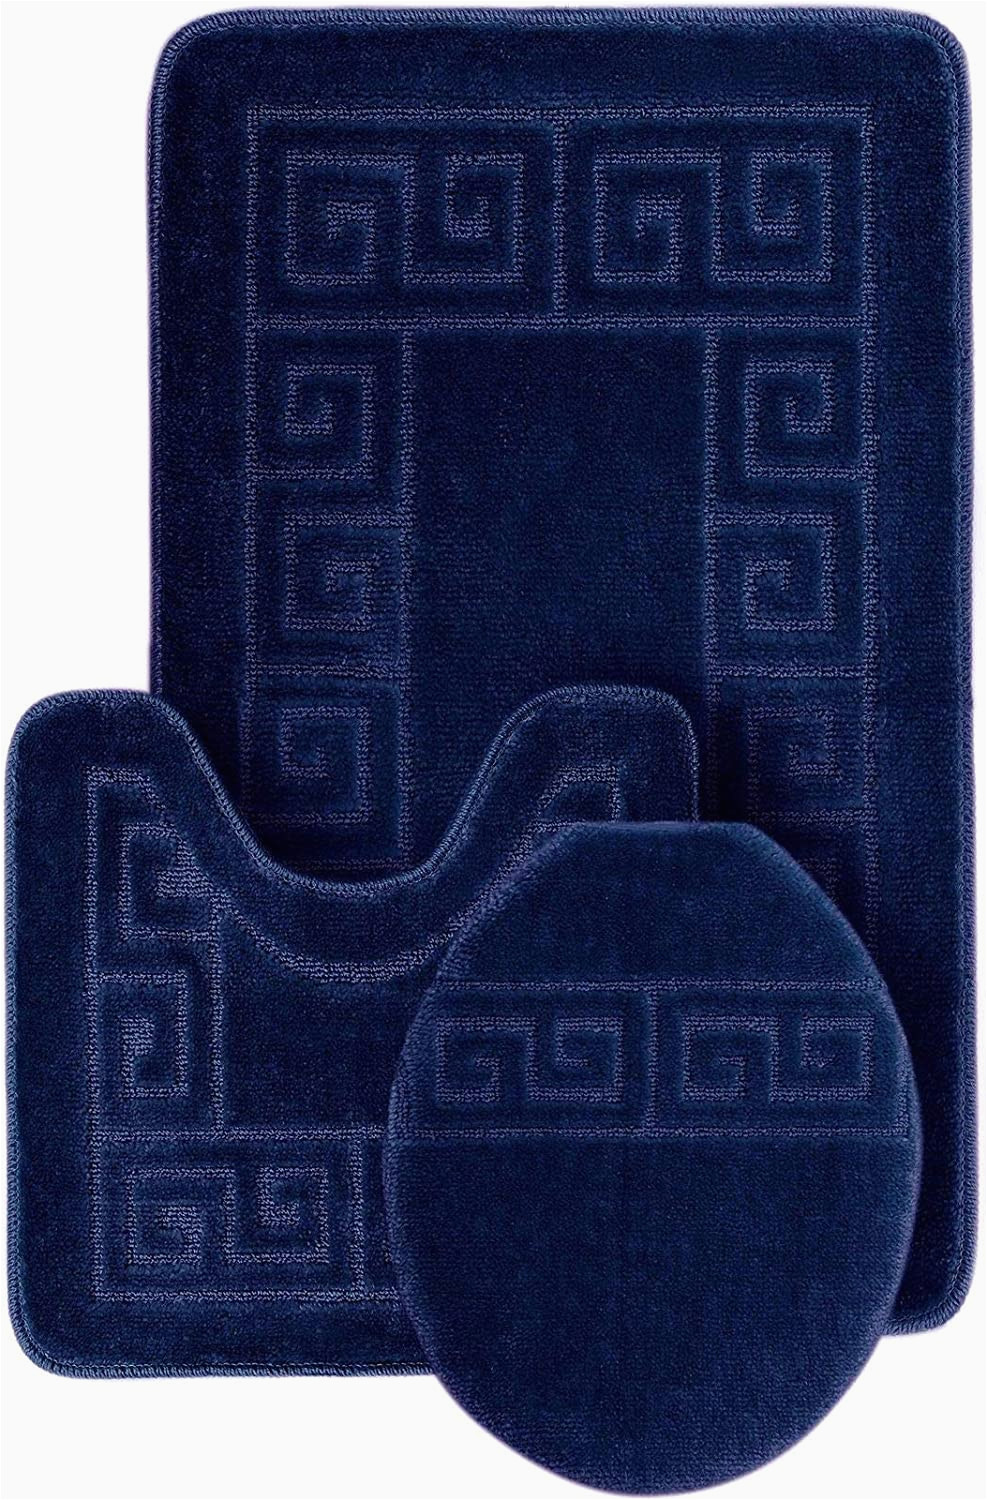 3 X 4 Bath Rug Wpm World Products Mart Bathroom Rugs Set 3 Piece Bath Pattern Rug 20×32 Large Contour Mats 20×20 with Lid Cover Navy